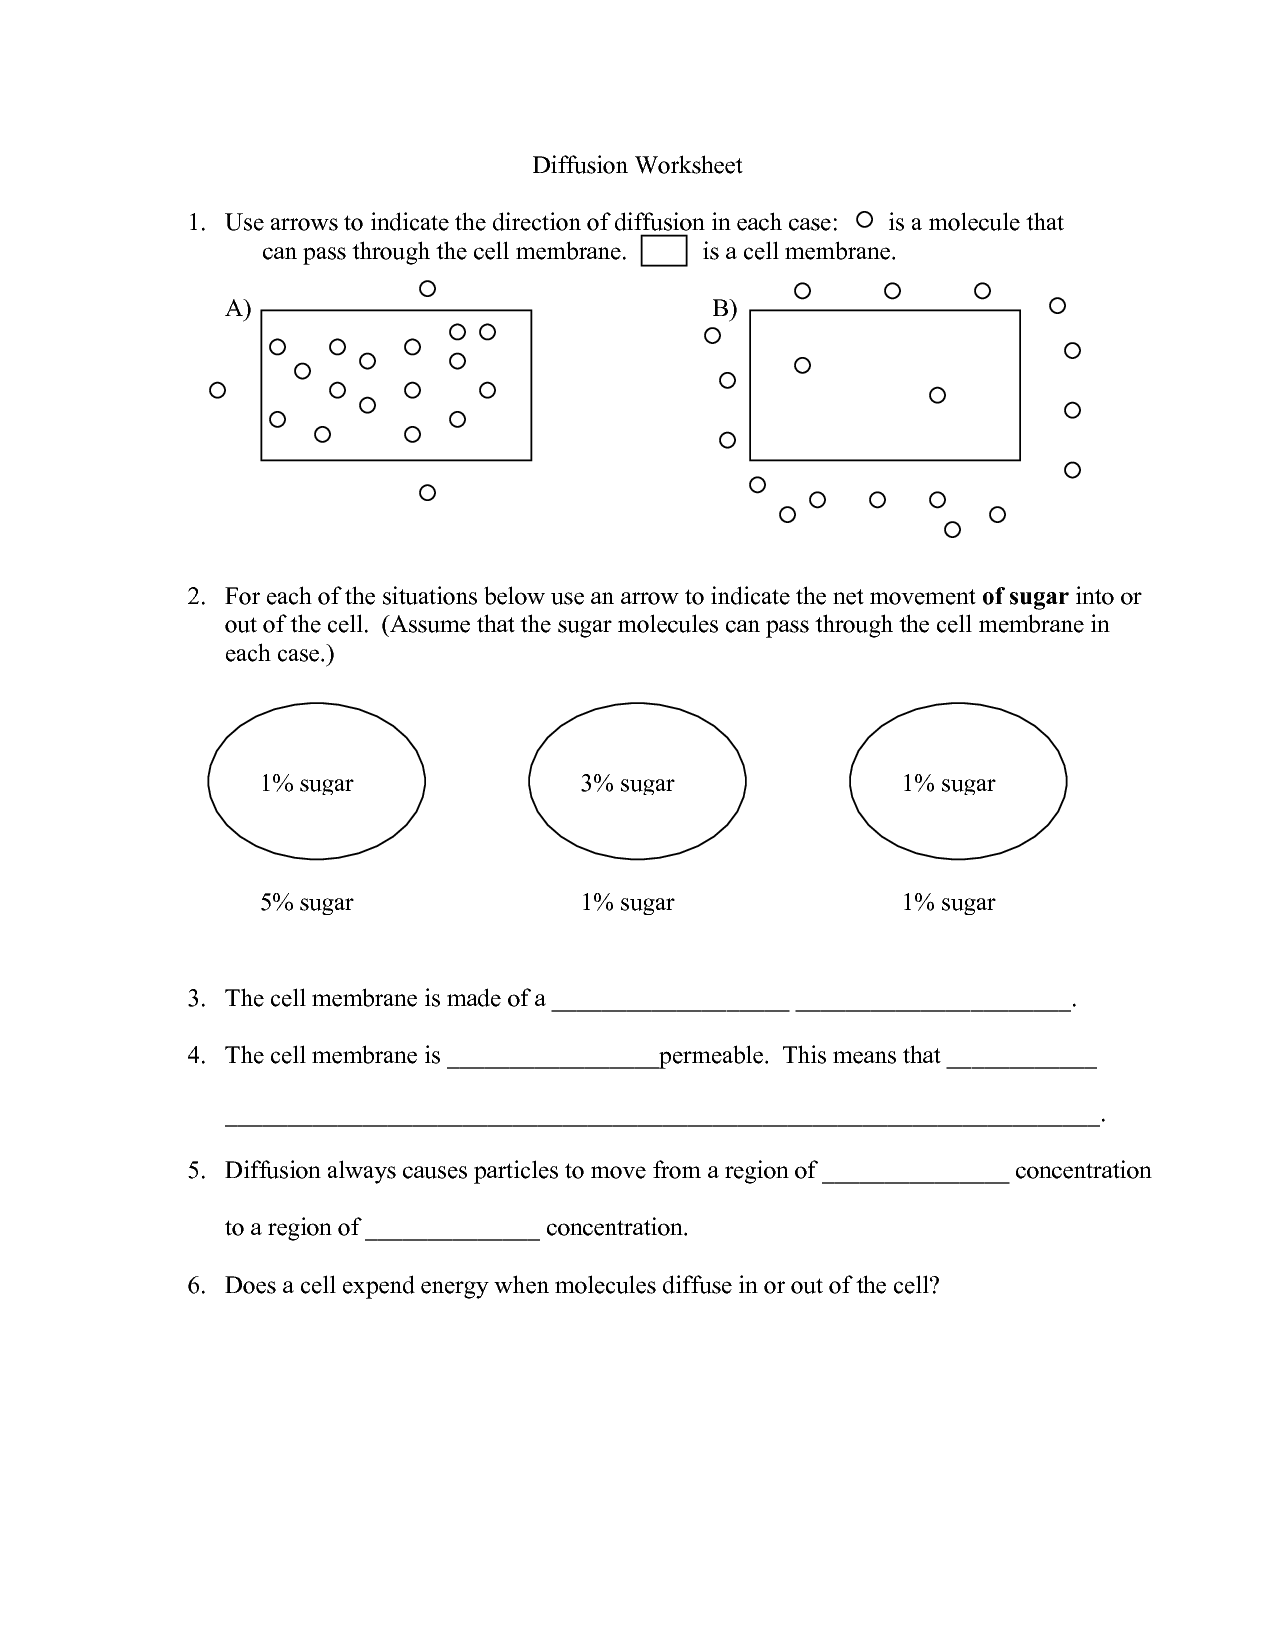 diffusion-and-osmosis-worksheet-answers-education-template